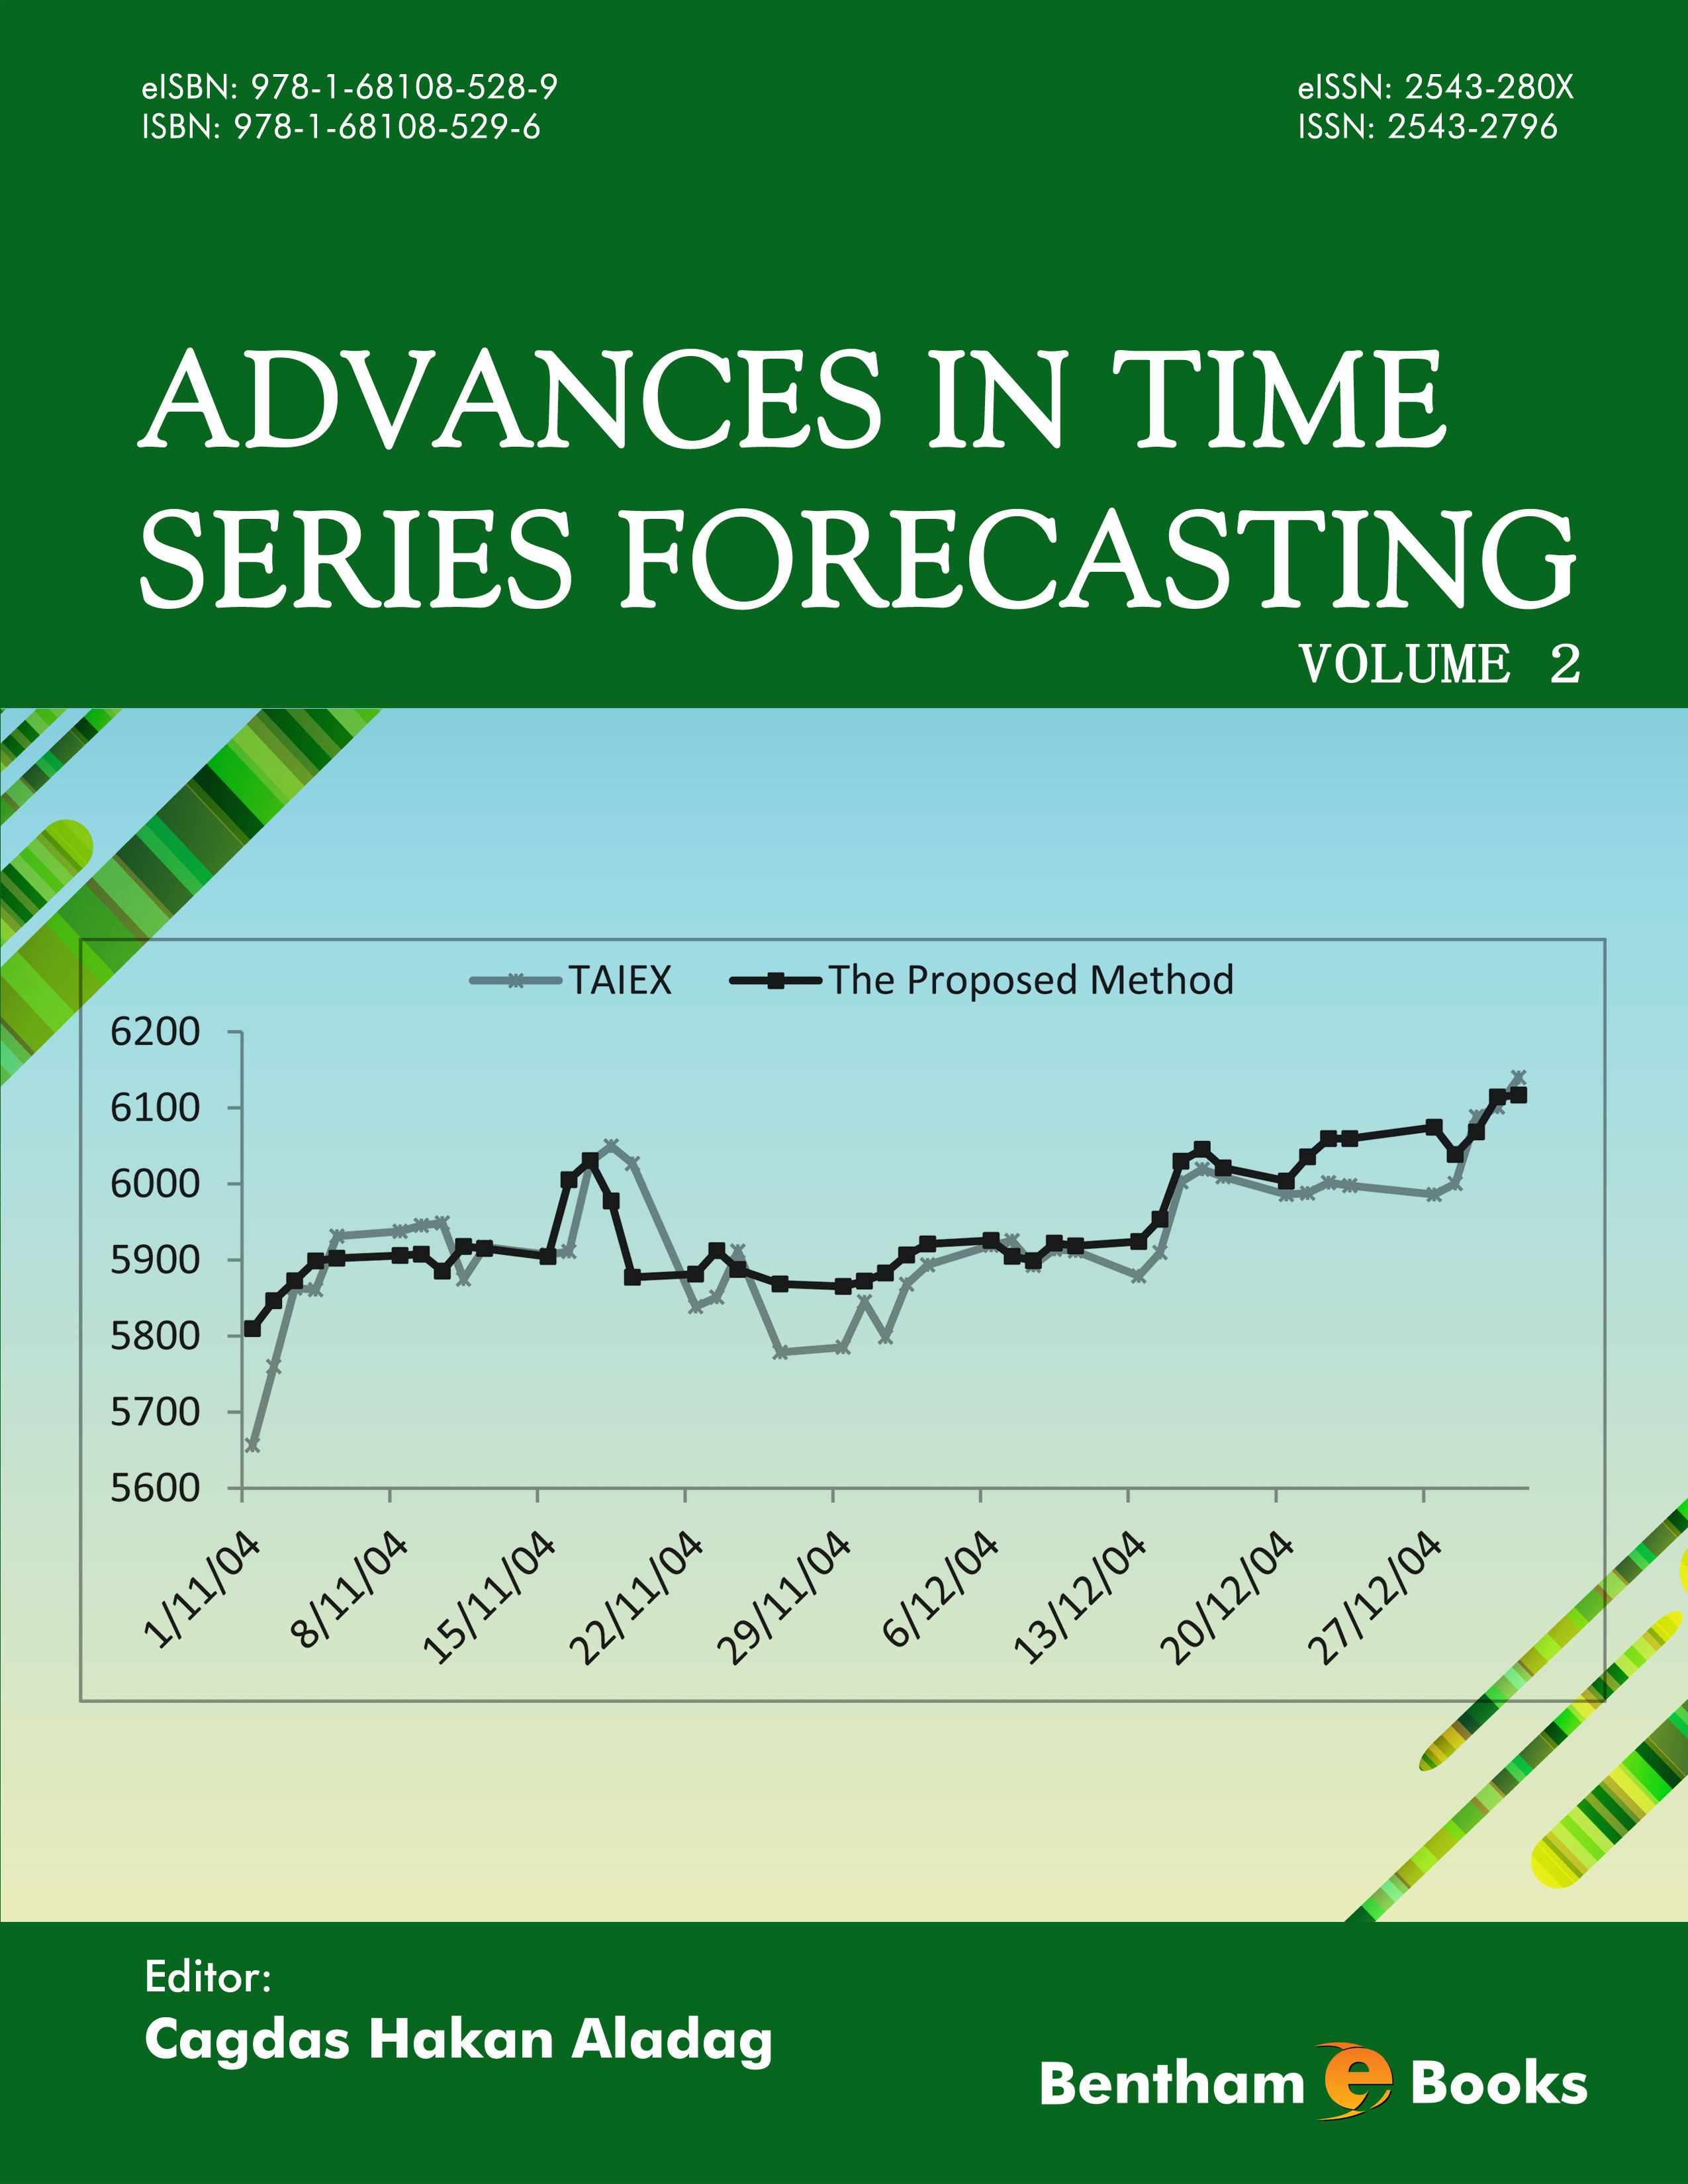 Advances in Time Series Forecasting